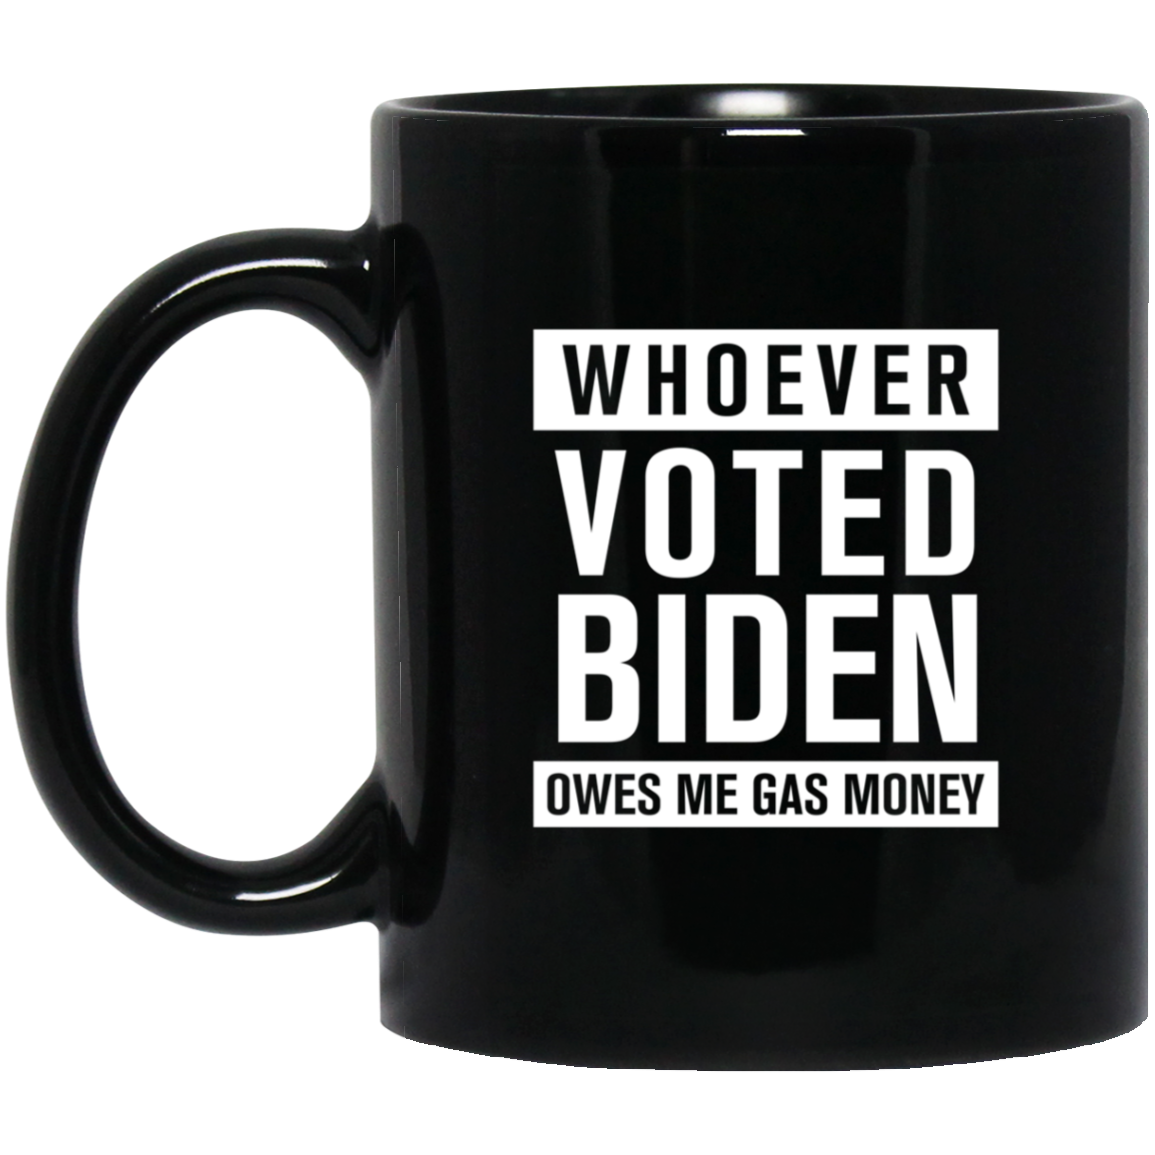 Whoever Voted Biden Owes Me Gas Money - MUGS